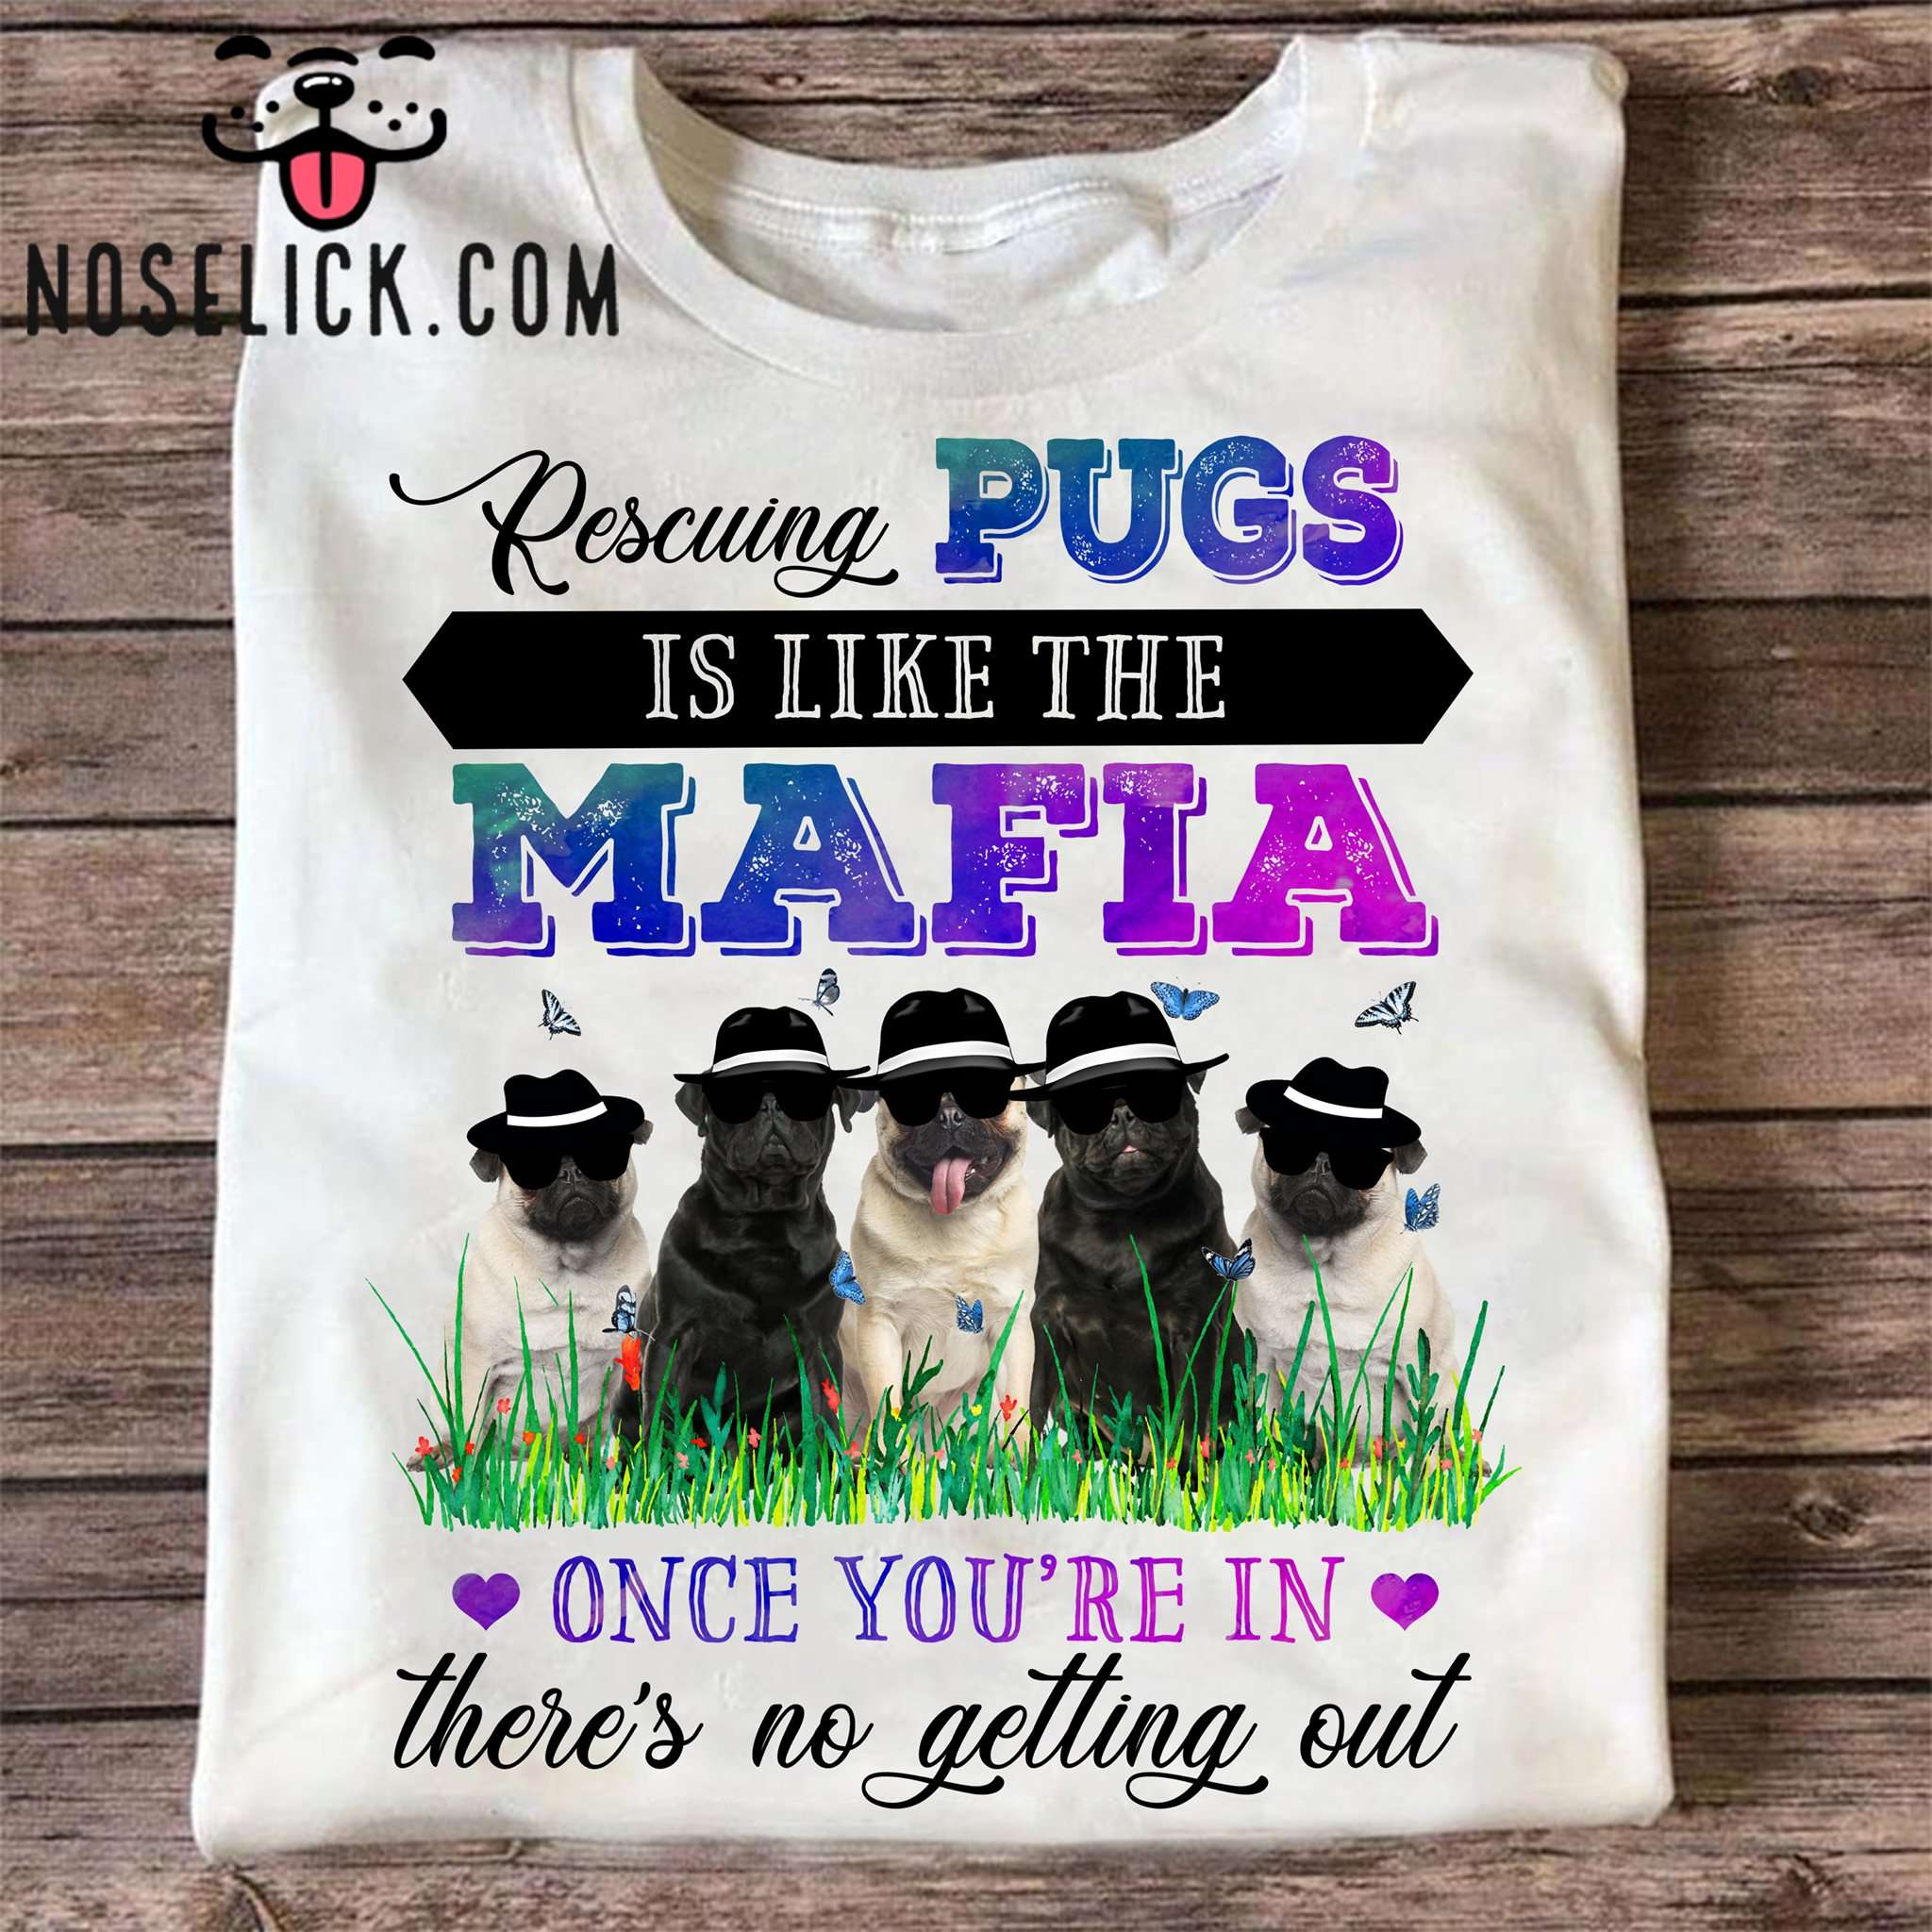 Rescuing pugs is like the mafia, once you're in there's no getting out - Pug dog mafia